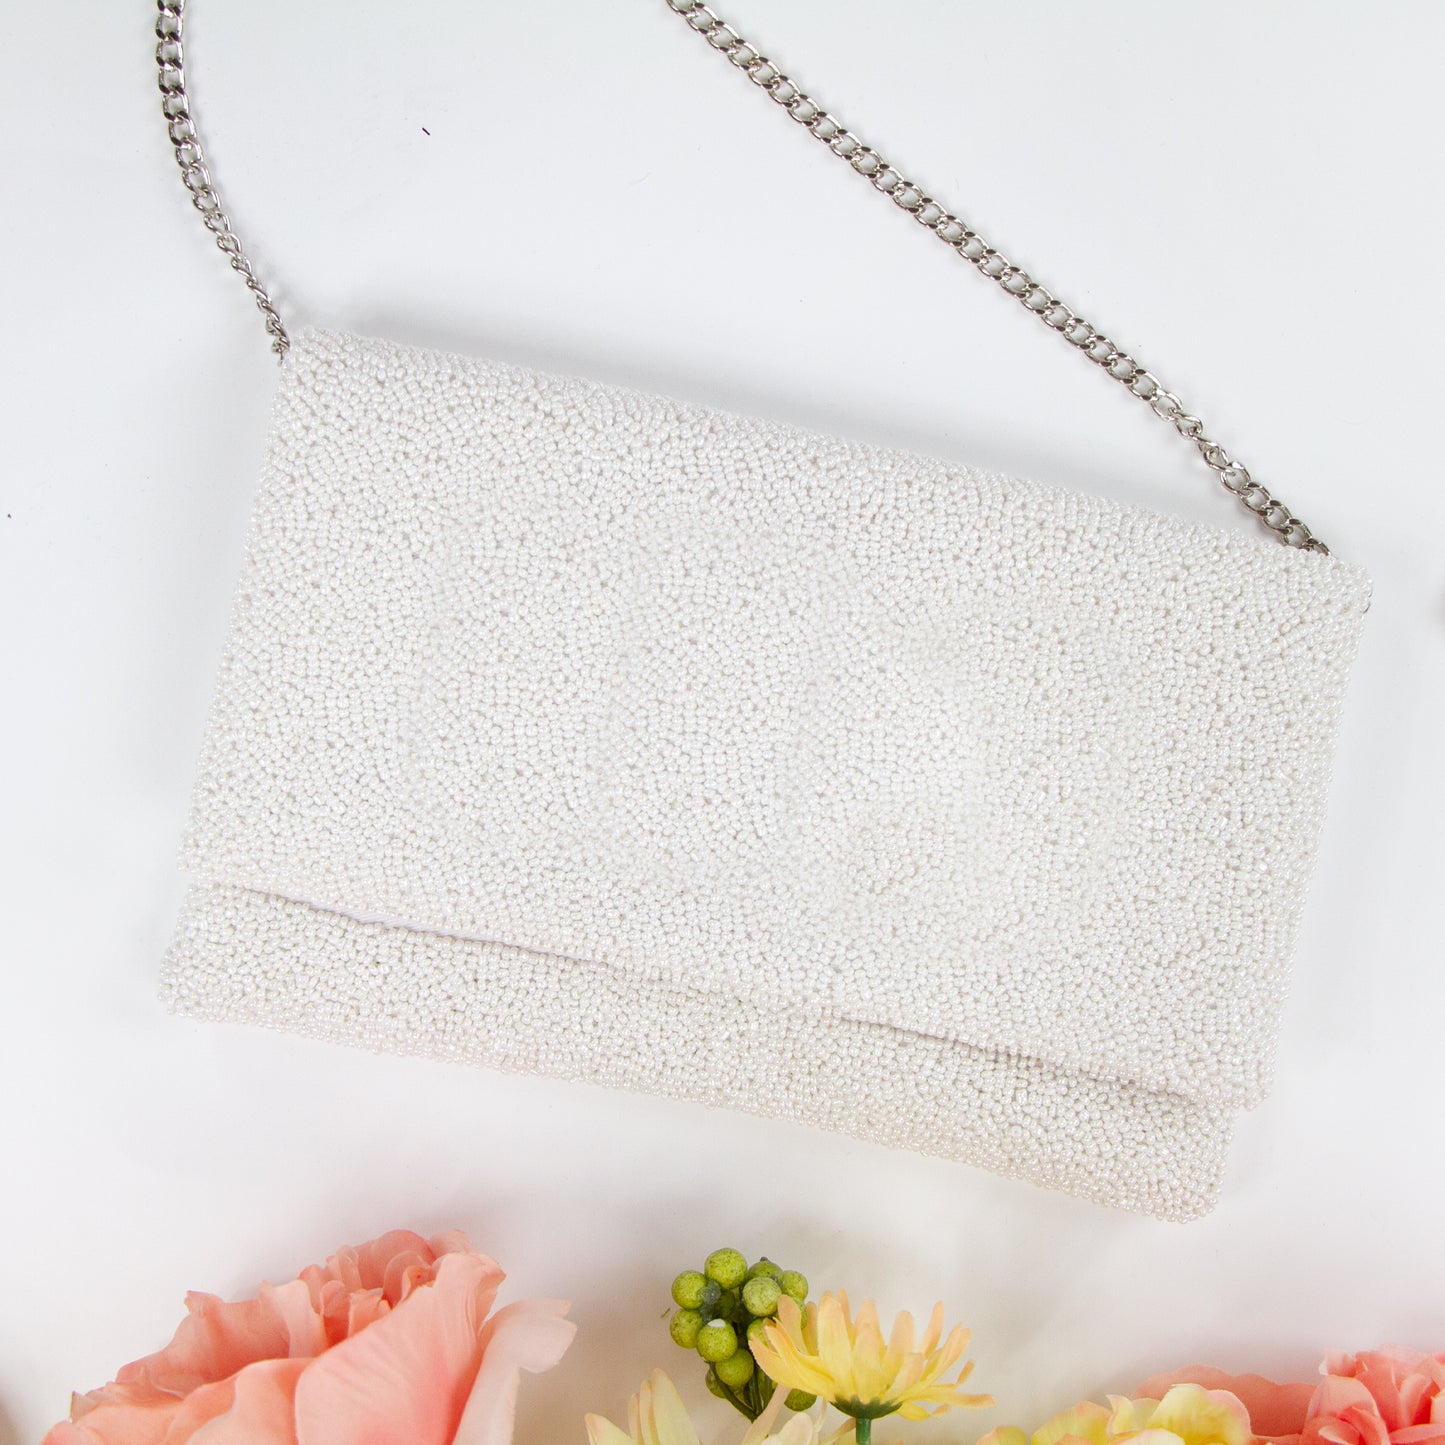 Title/bridal Clutch "Elegant white beaded bridal clutch, handmade to perfection, sized at 10.5 x 7 x 1 inches. This durable canvas bridal clutch with magnetic snap closure offers a stylish and practical solution for the wedding day, ensuring each bride has a unique accessory for her special occasion."